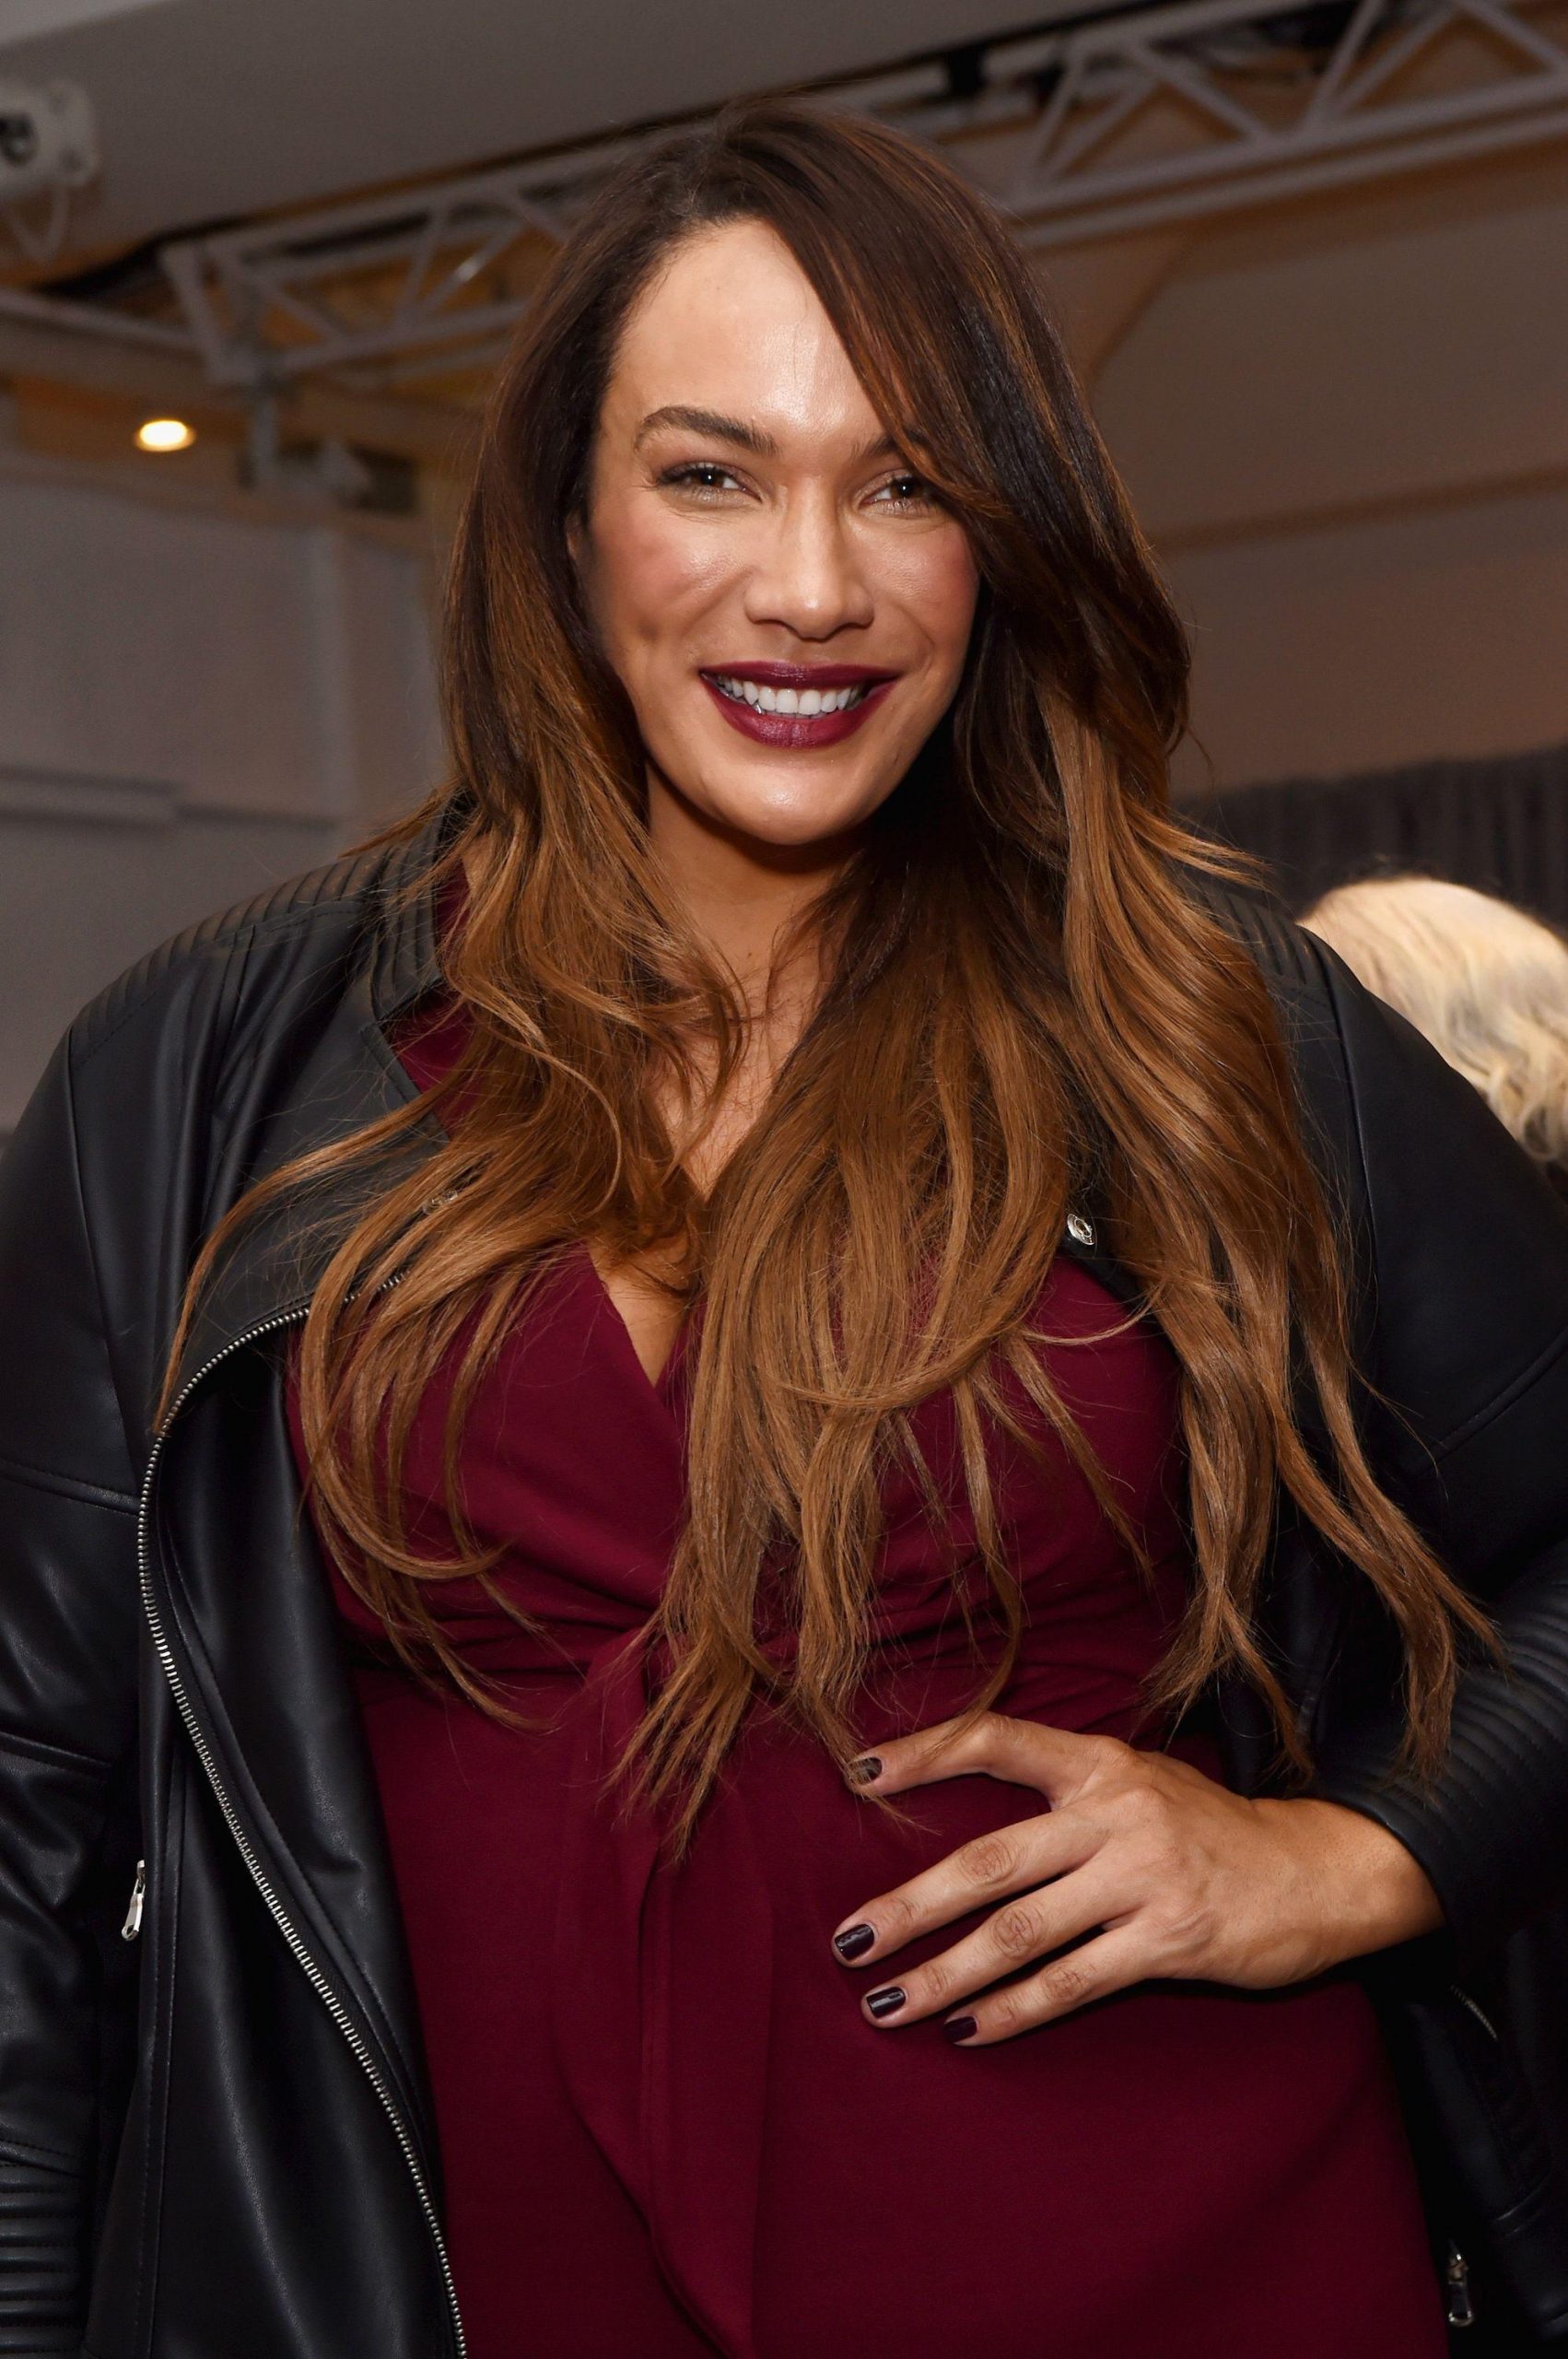 70+ Hot Pictures Of Nia Jax Are Here To Take Your Breath Away 19